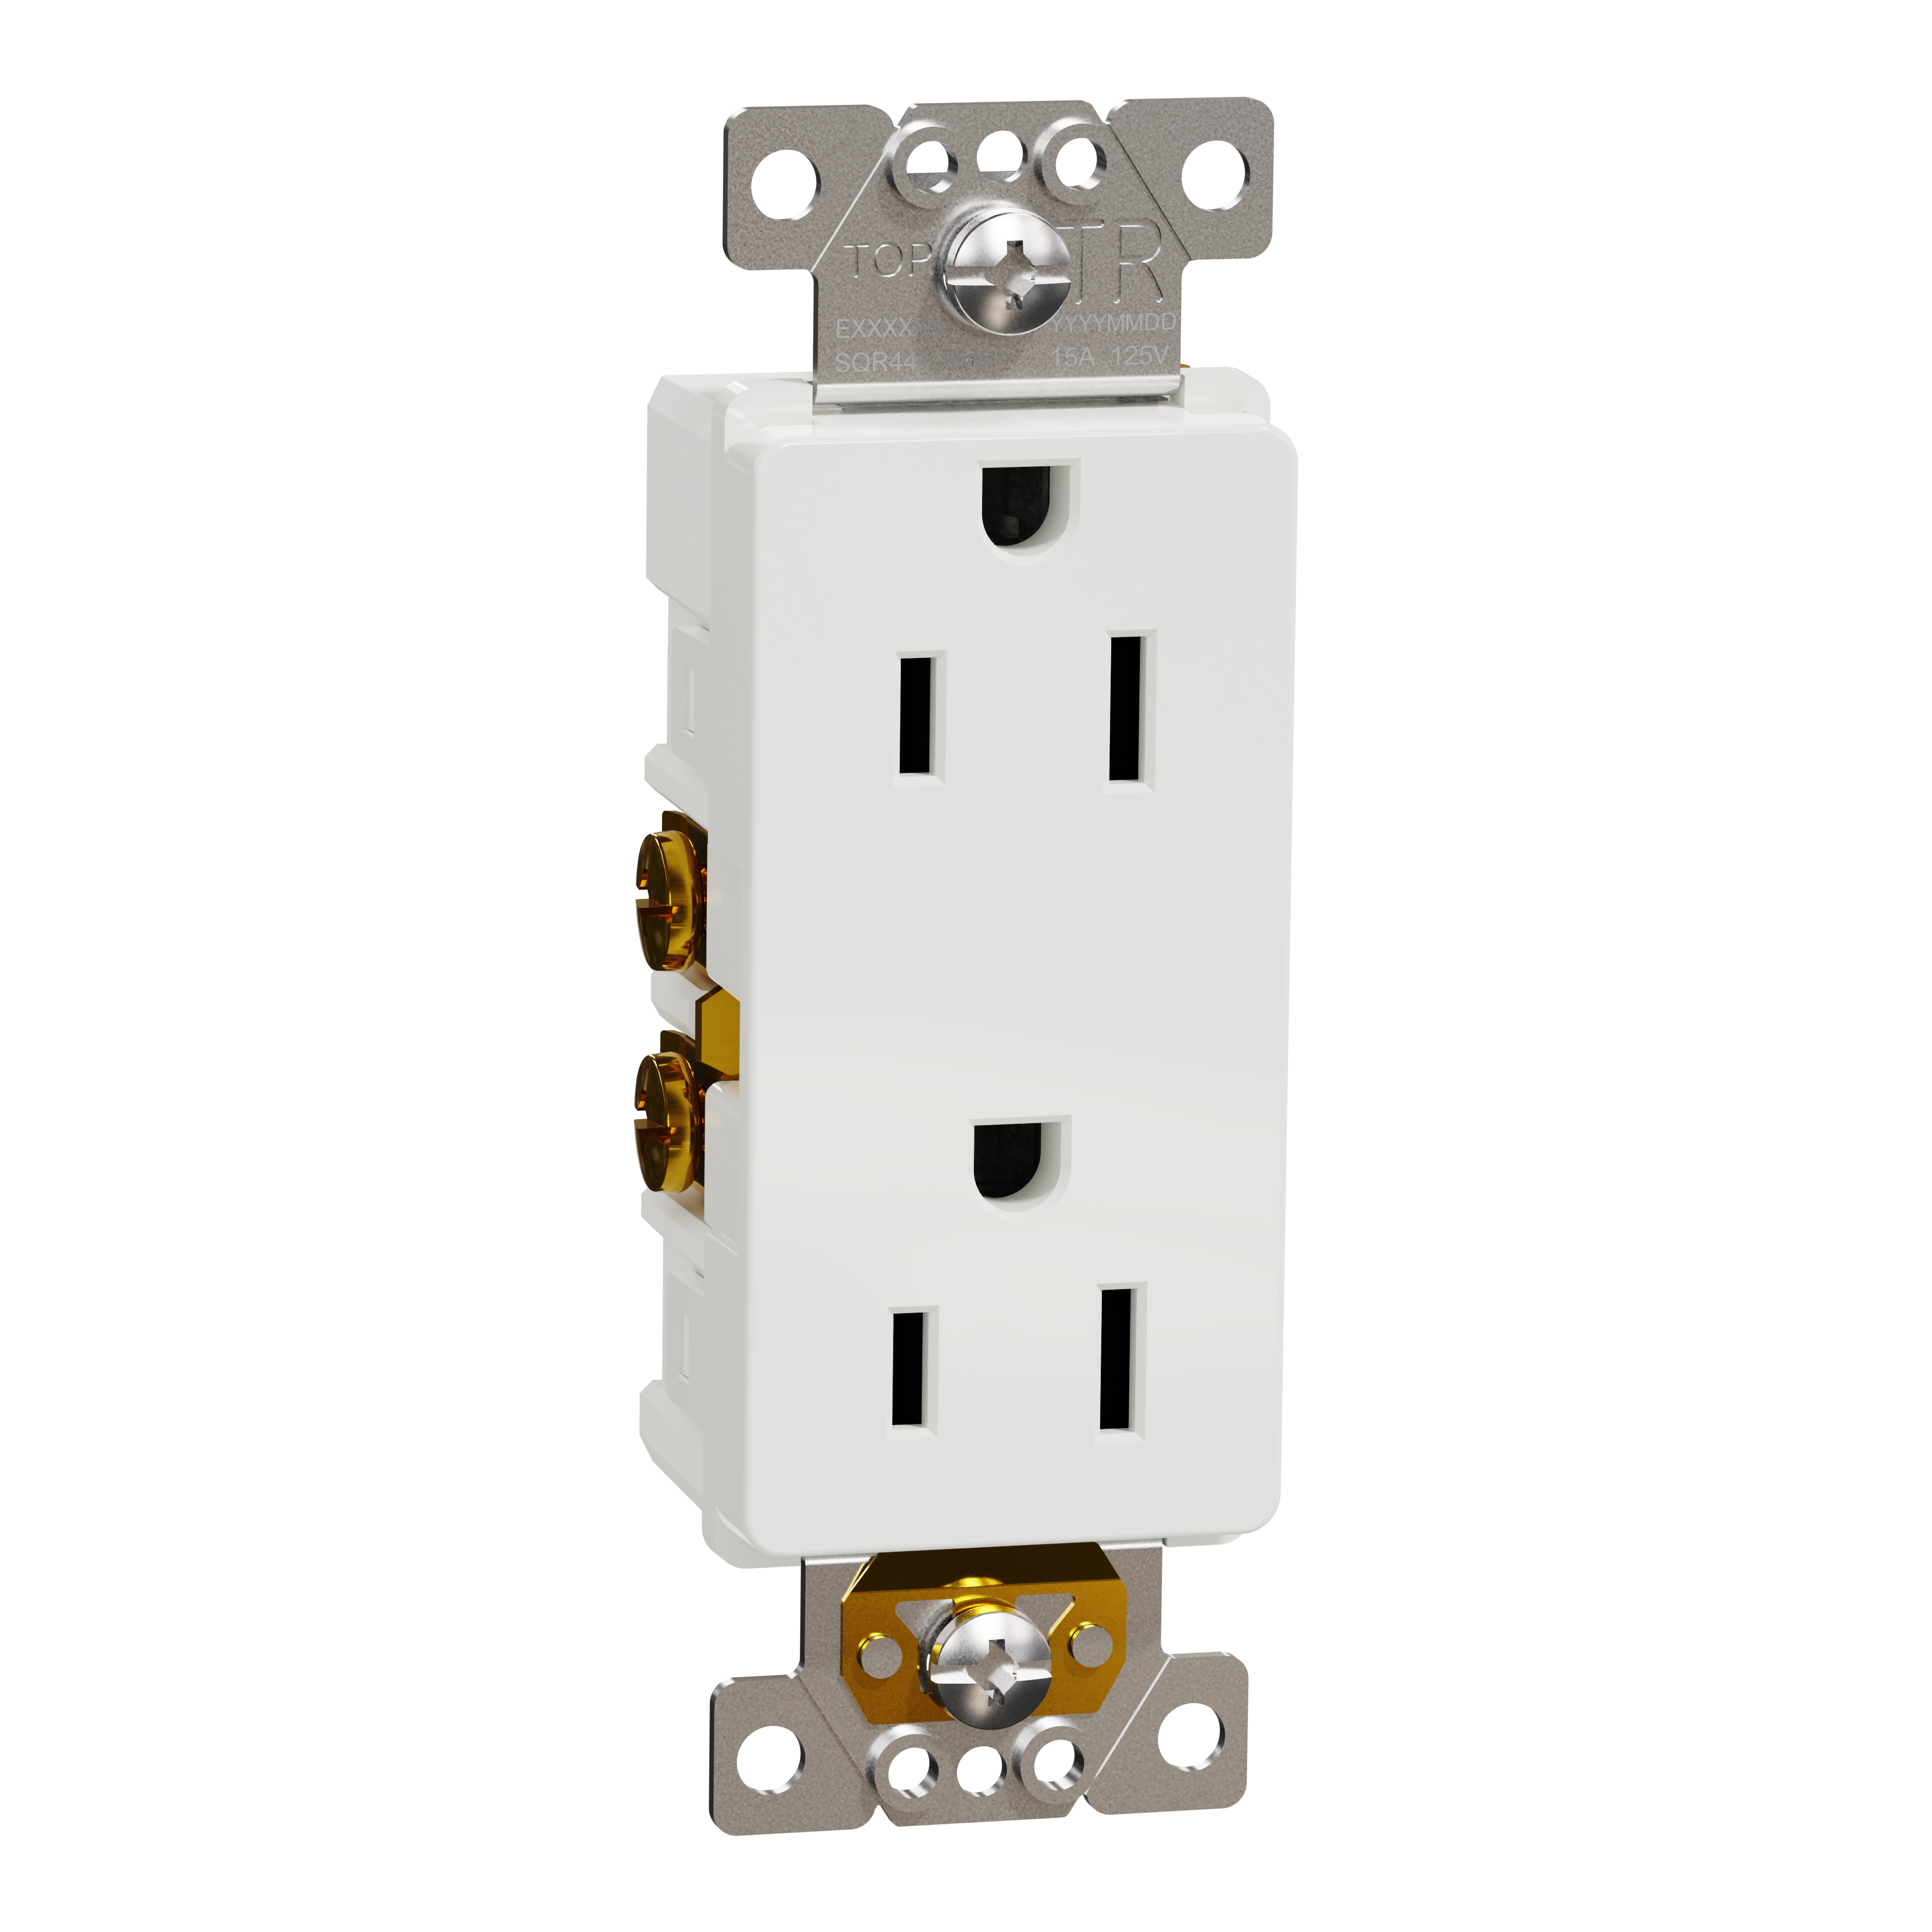 Socket-outlet, X Series, 15A, decorator, tamper resistant, residential, white, matte finish, 10 pcs